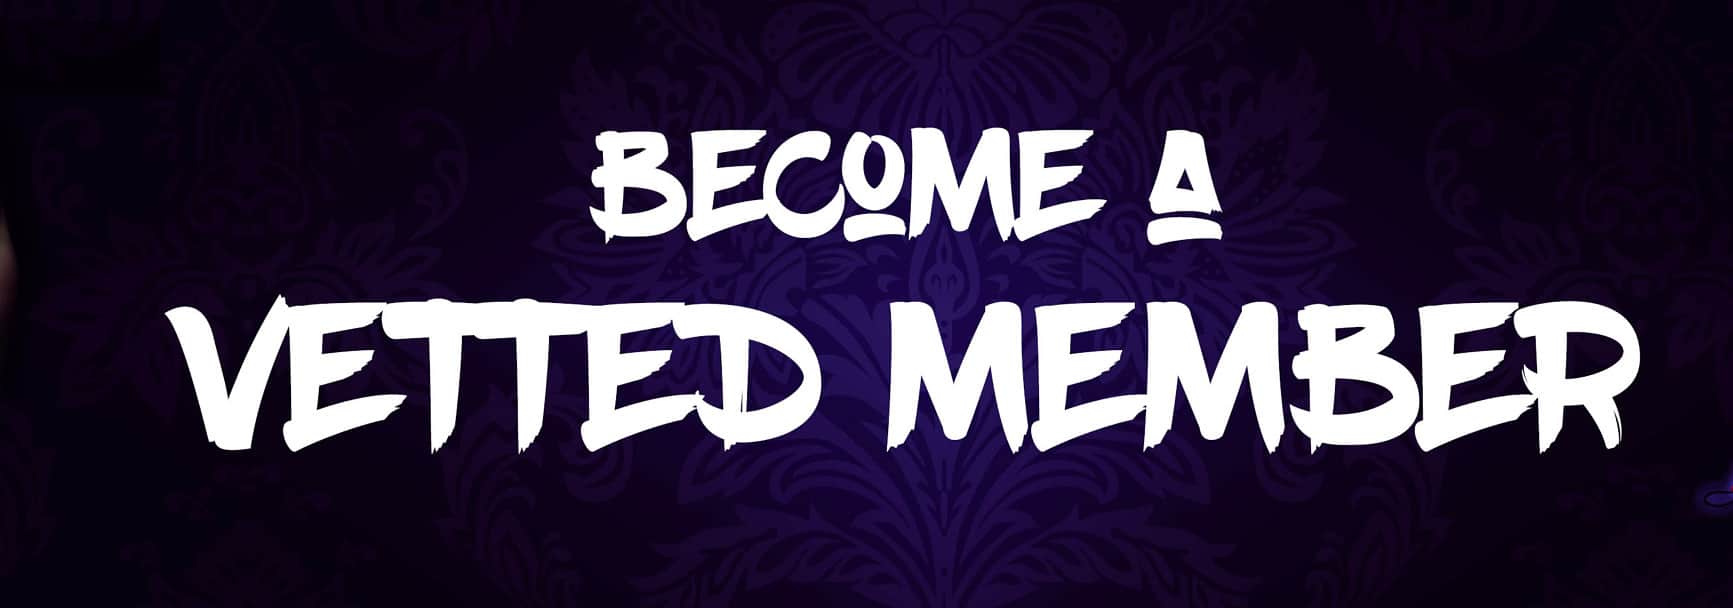 Become a Vetted Member